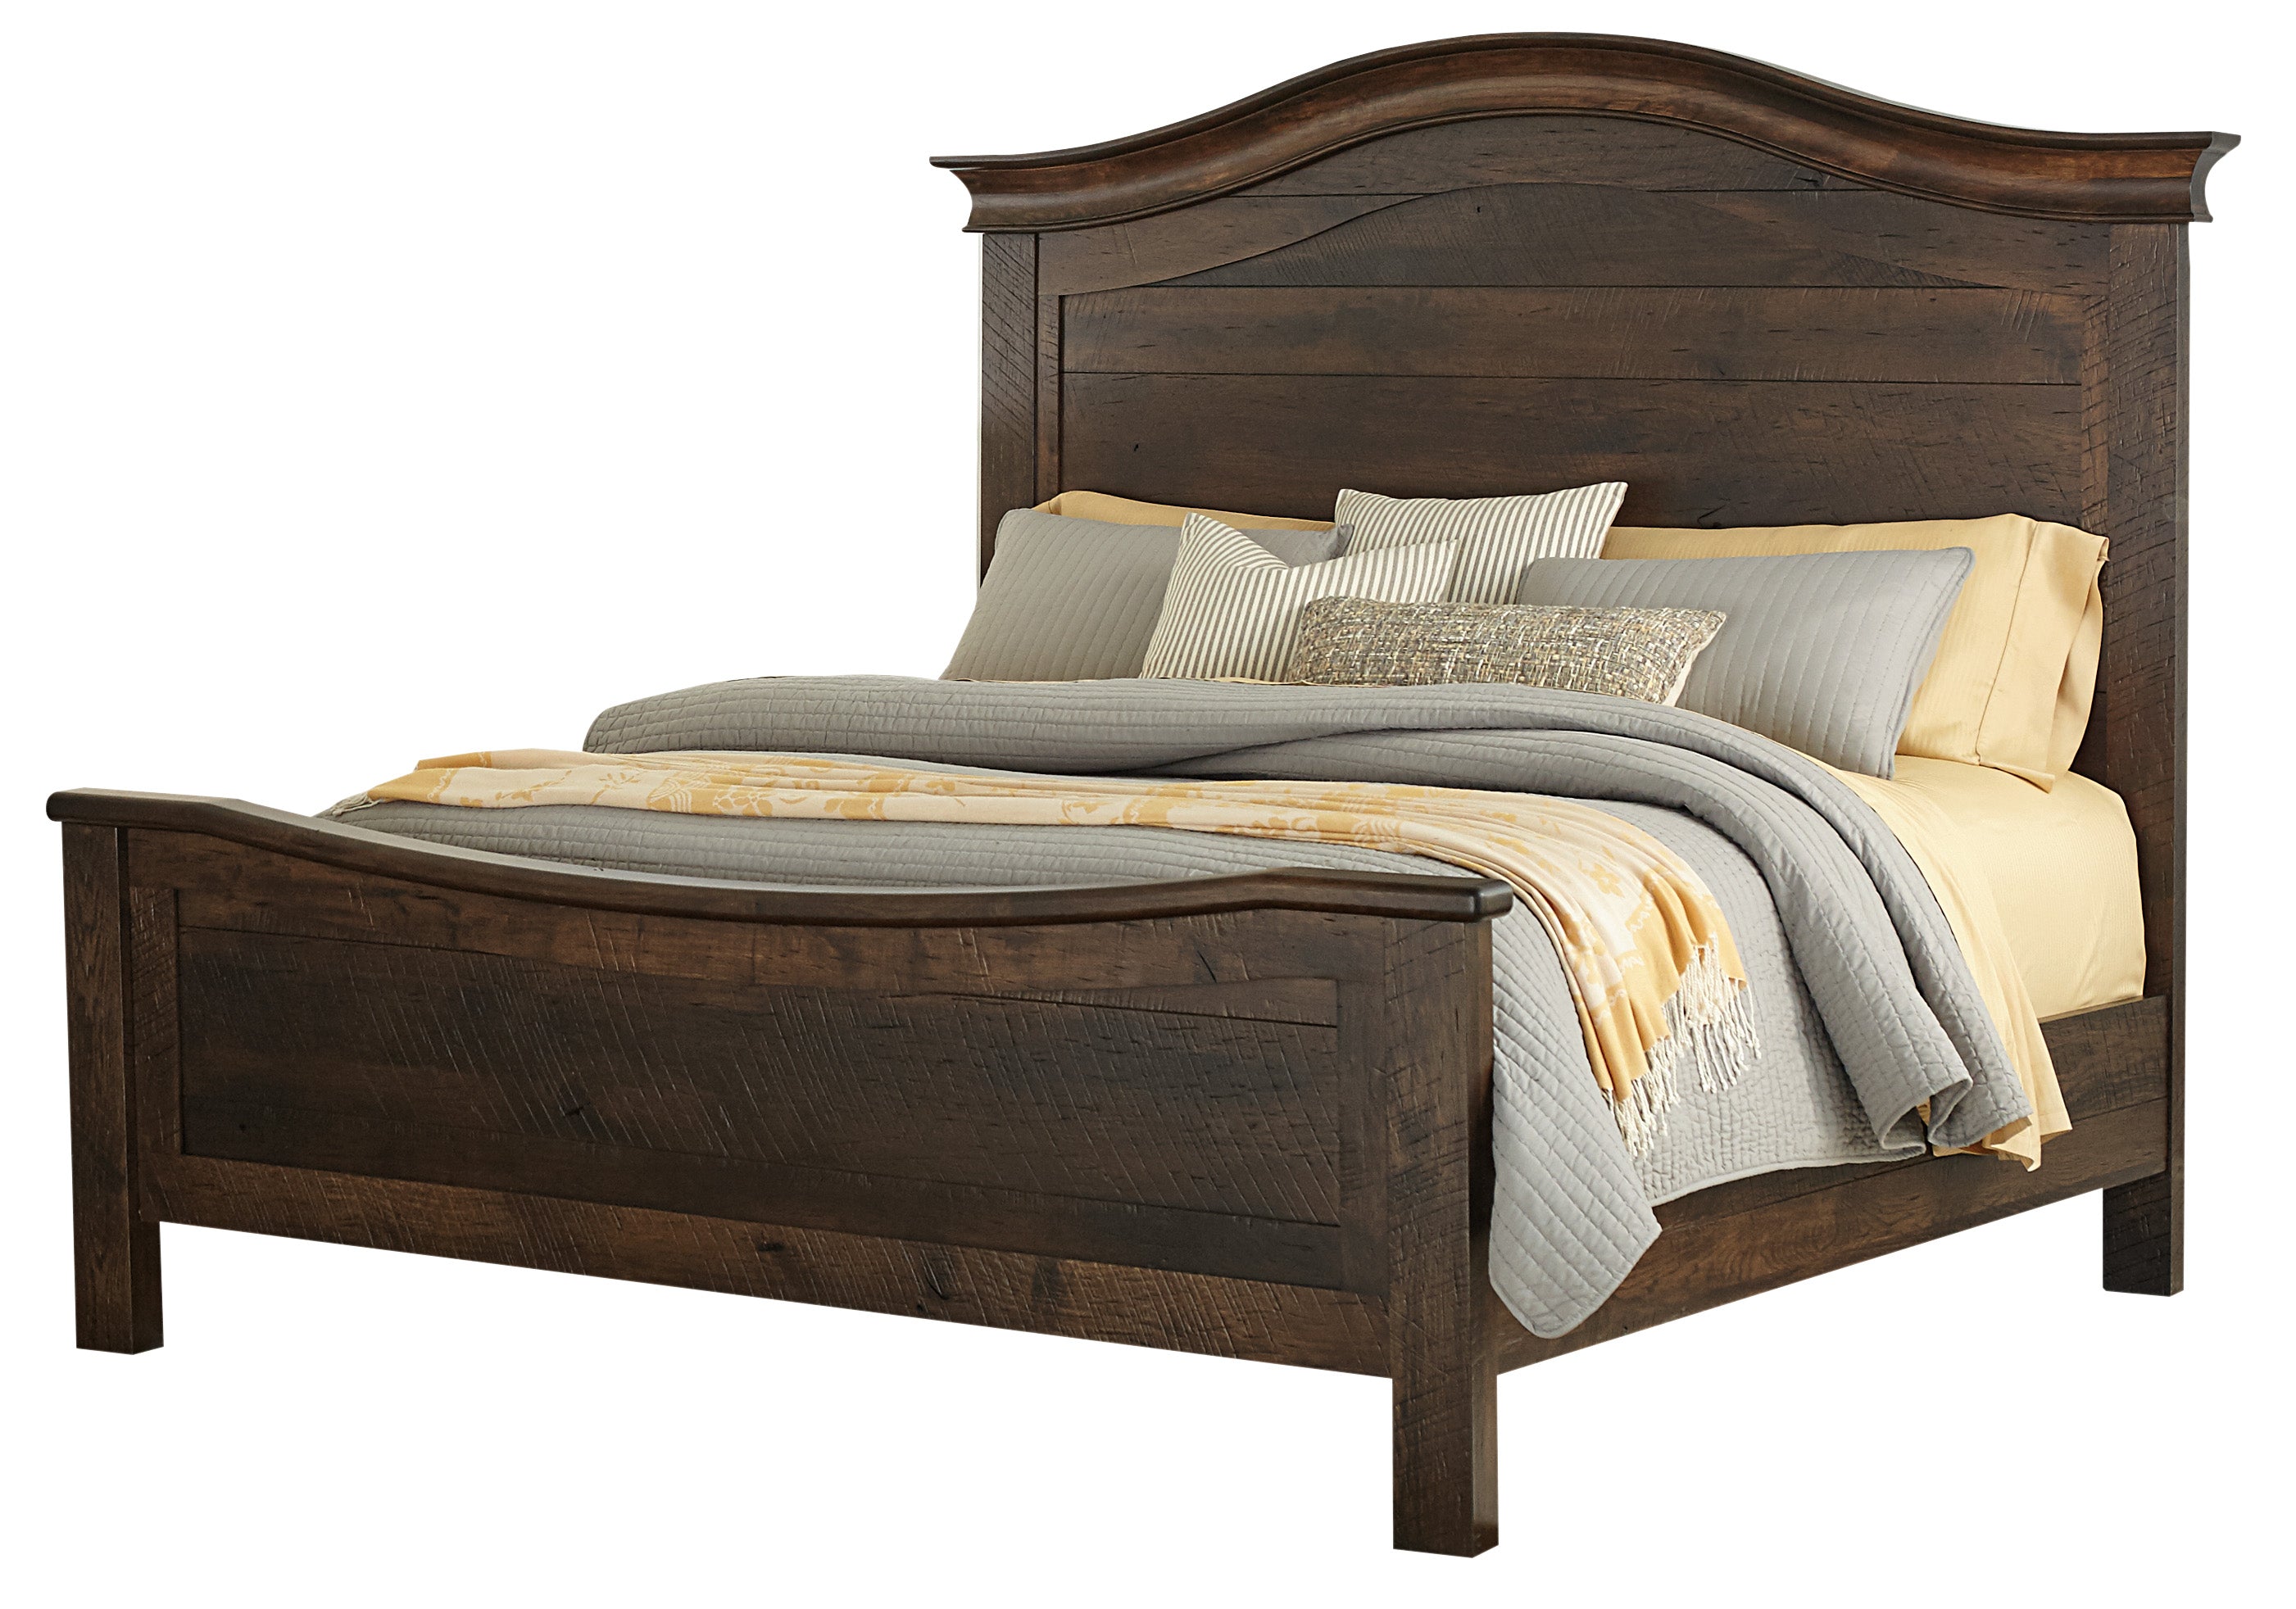 Farmhouse signature bed shown in rustic hickory wood with the earthtone stain